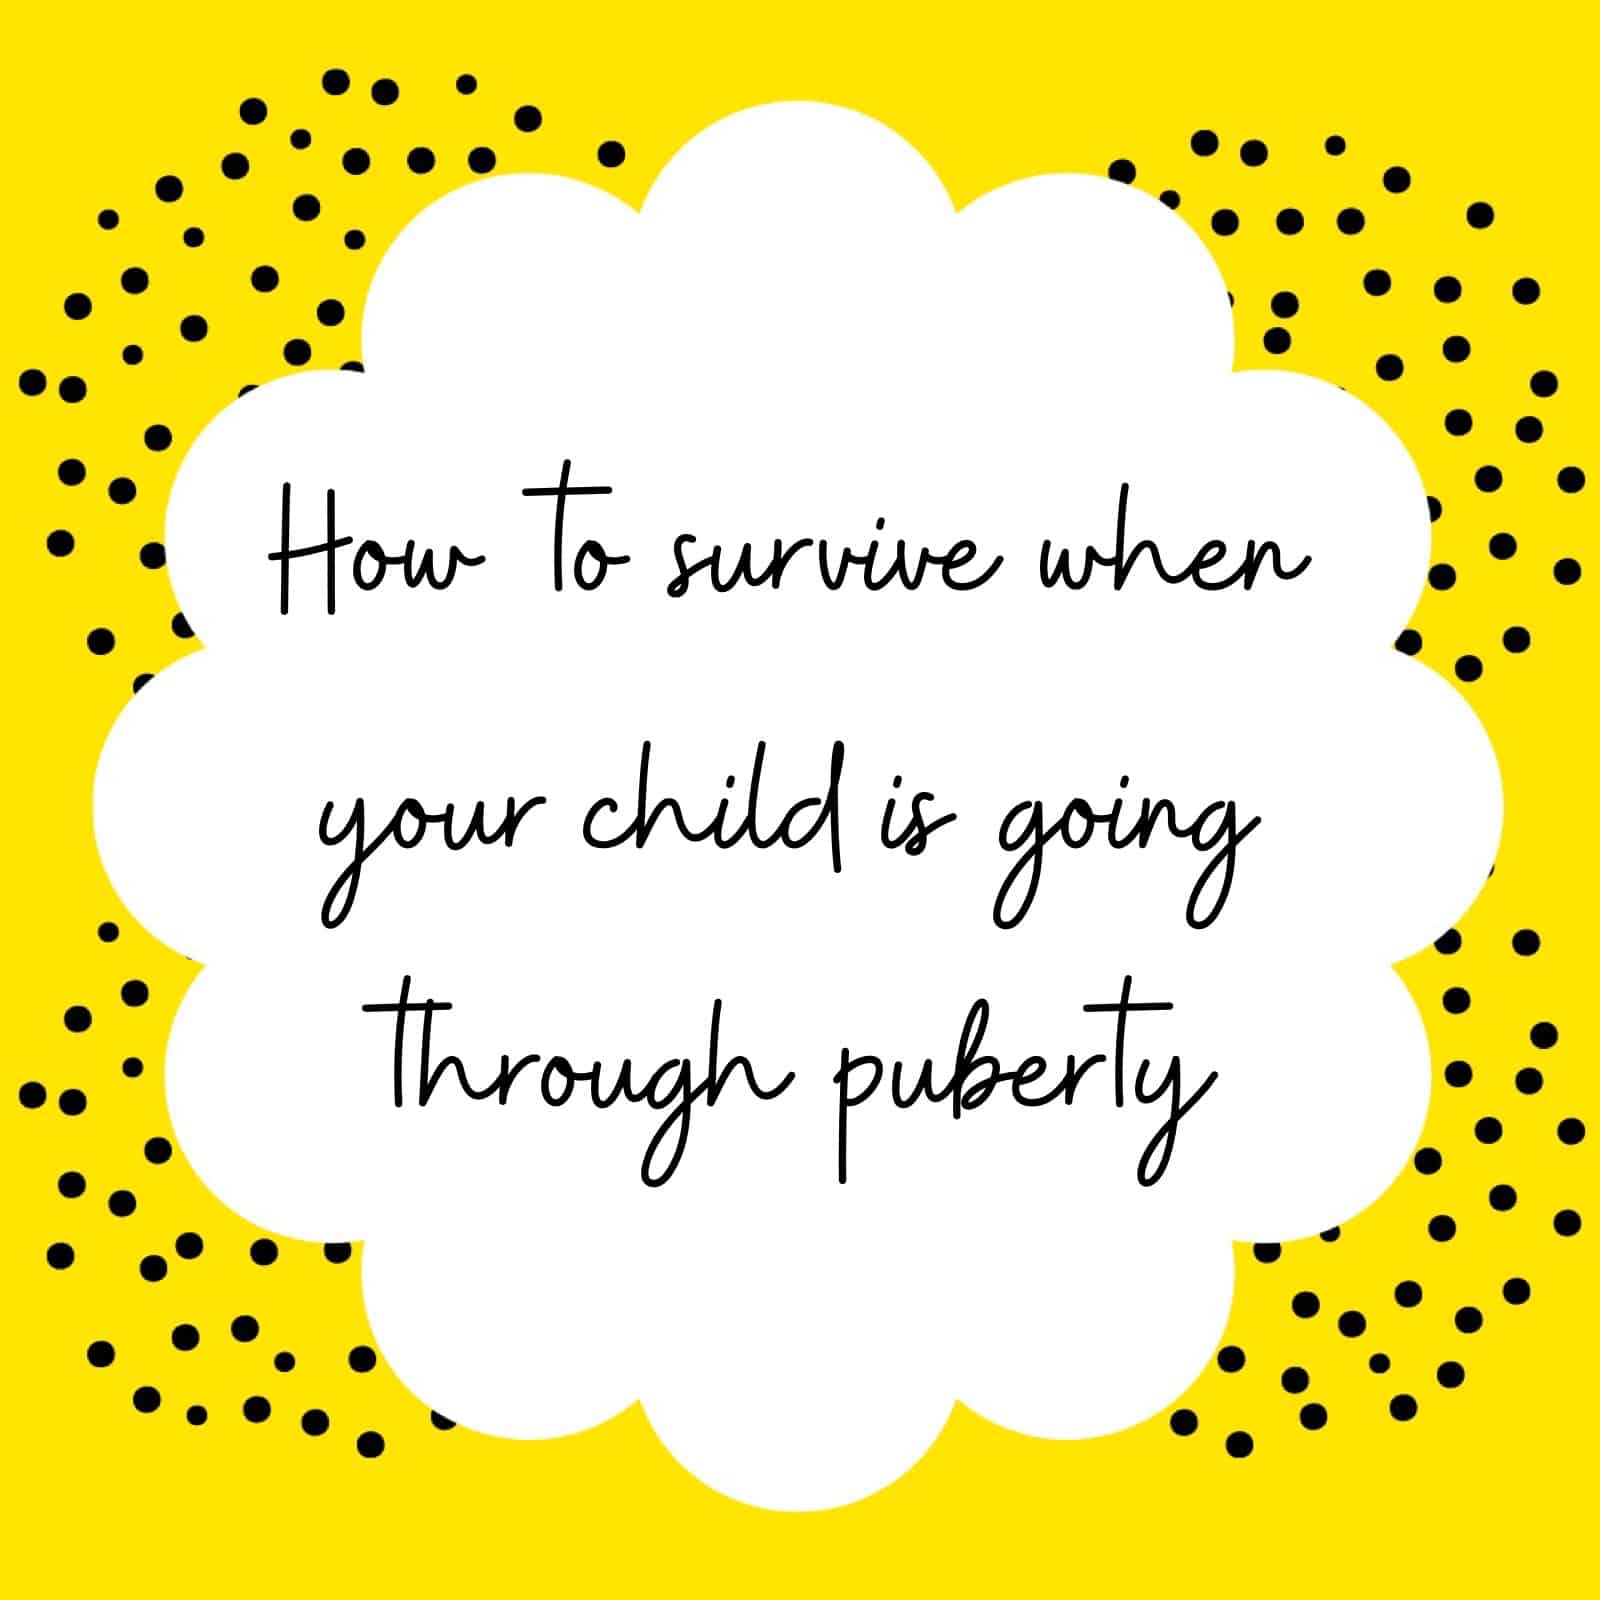 How to survive when your child is going through puberty